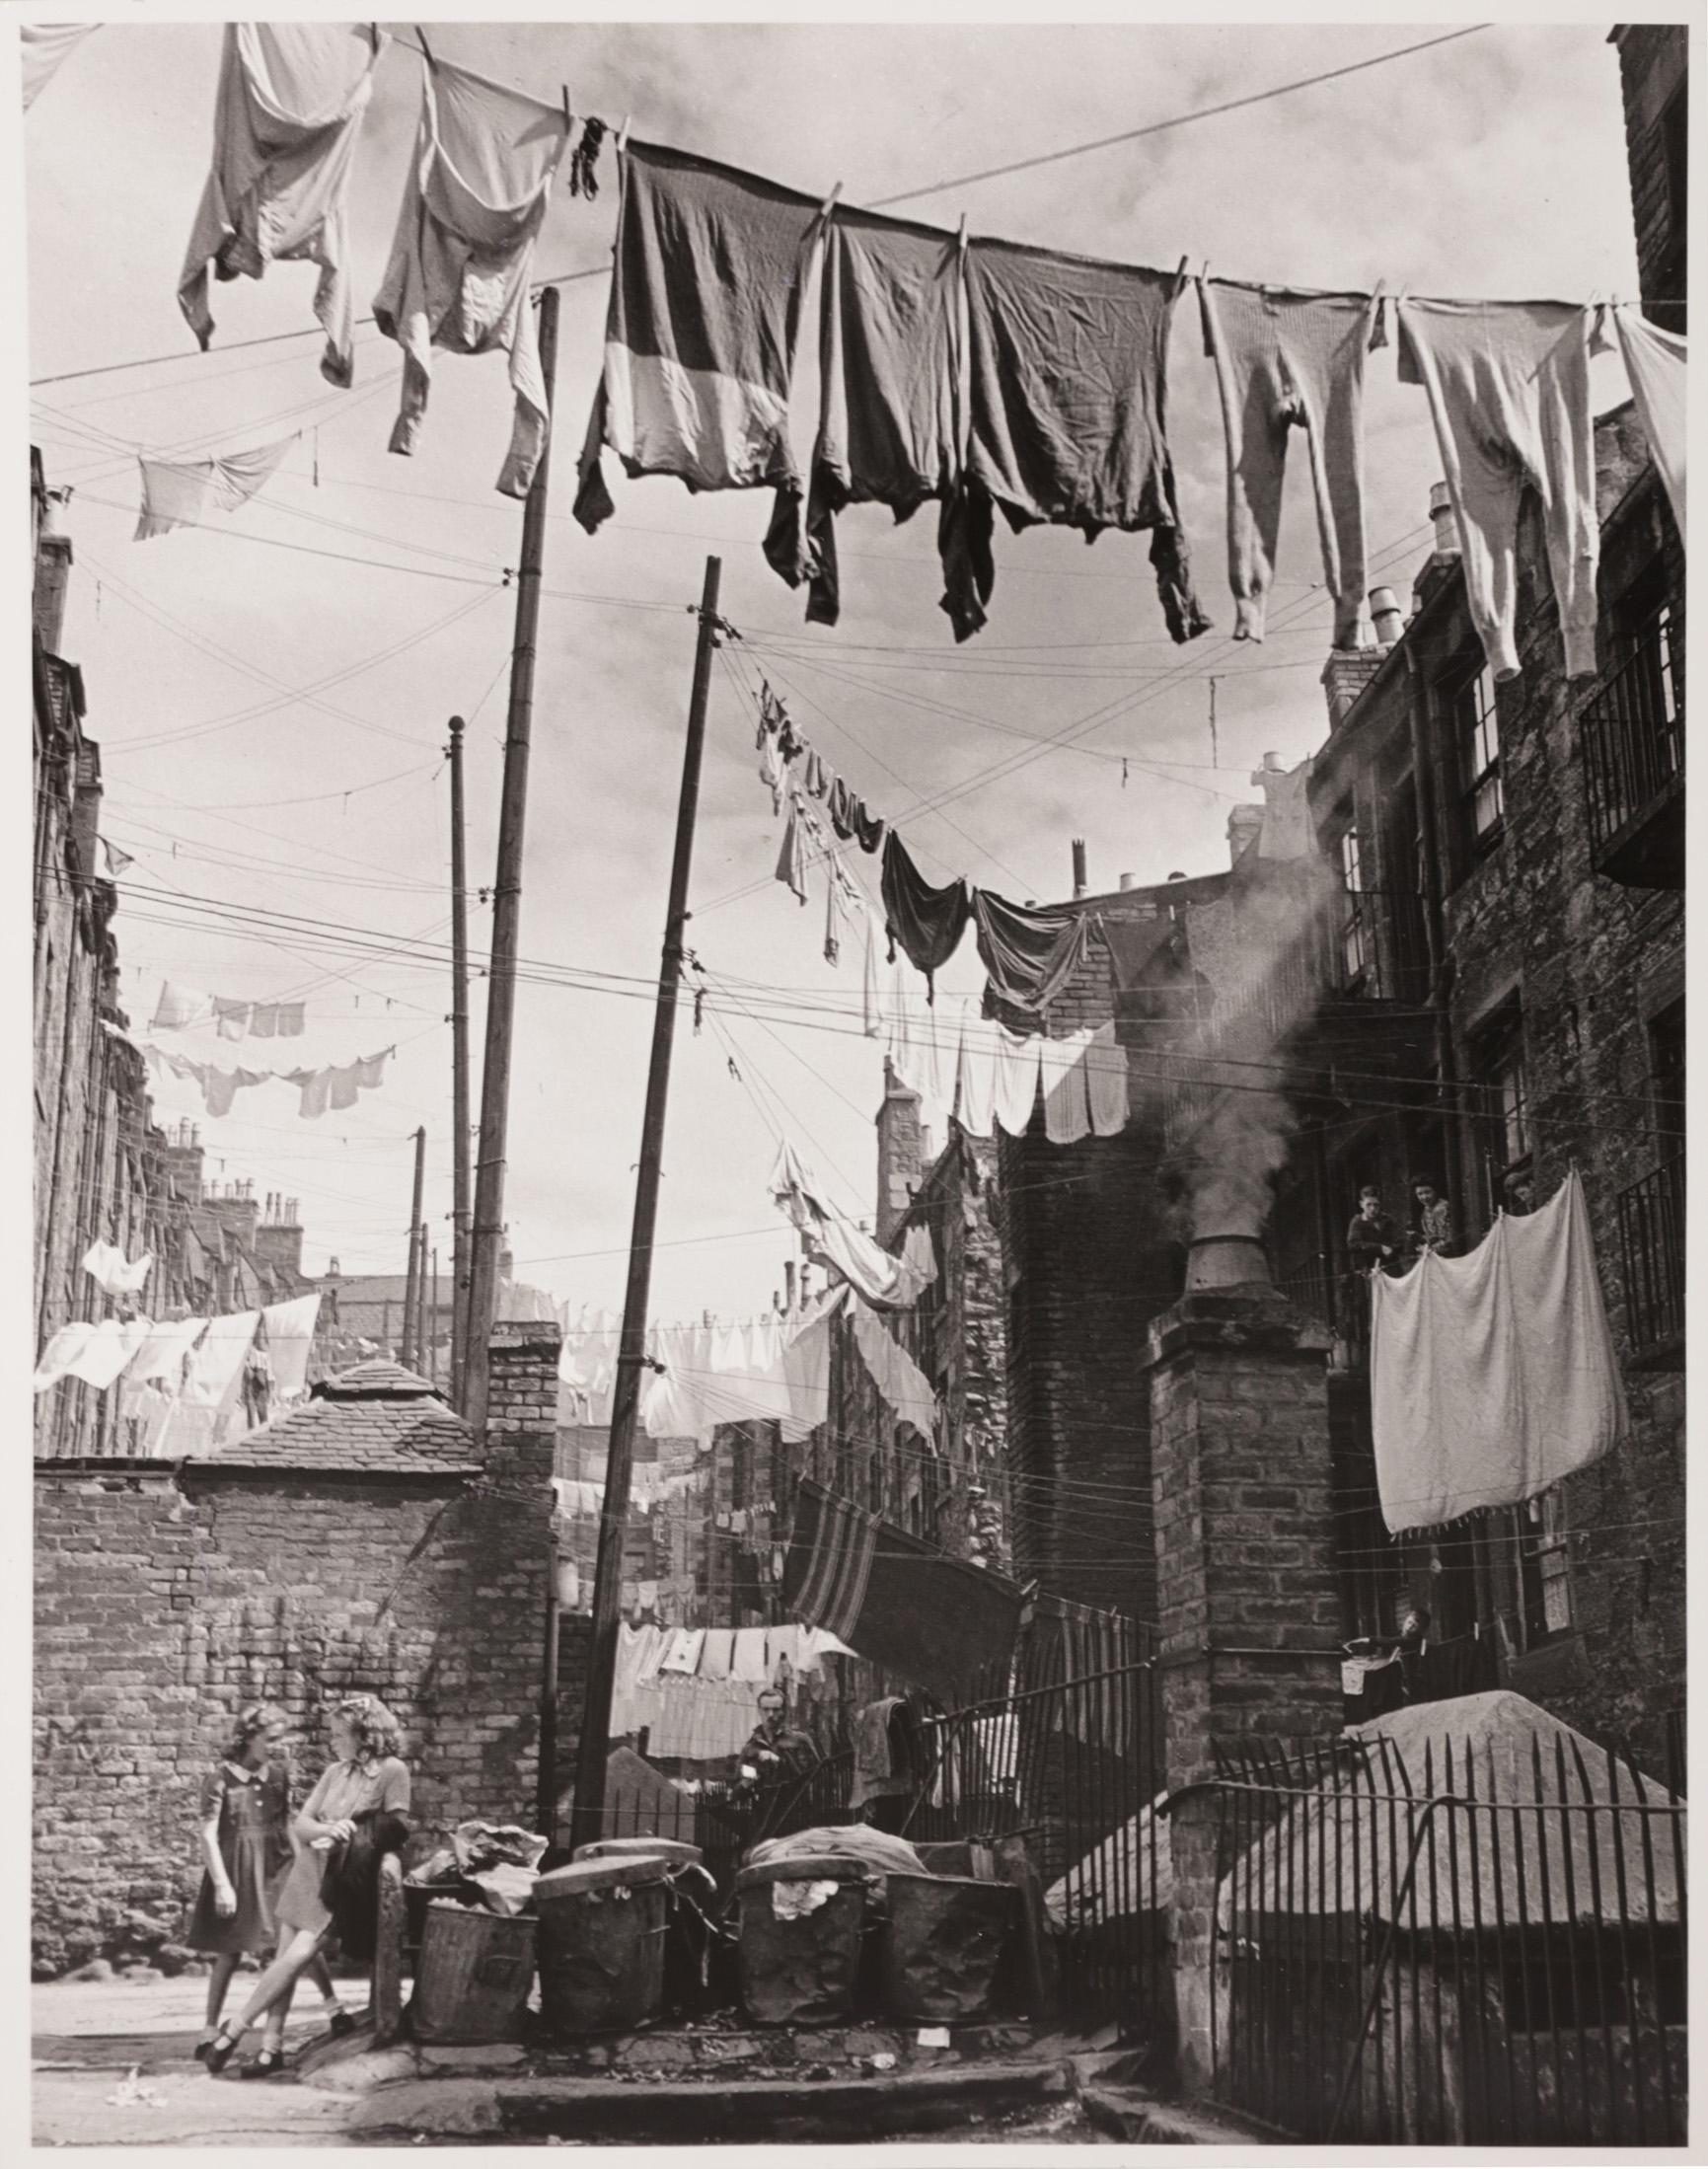 Washing Strung Between the Tenements, Dundee, Scotland, 1946